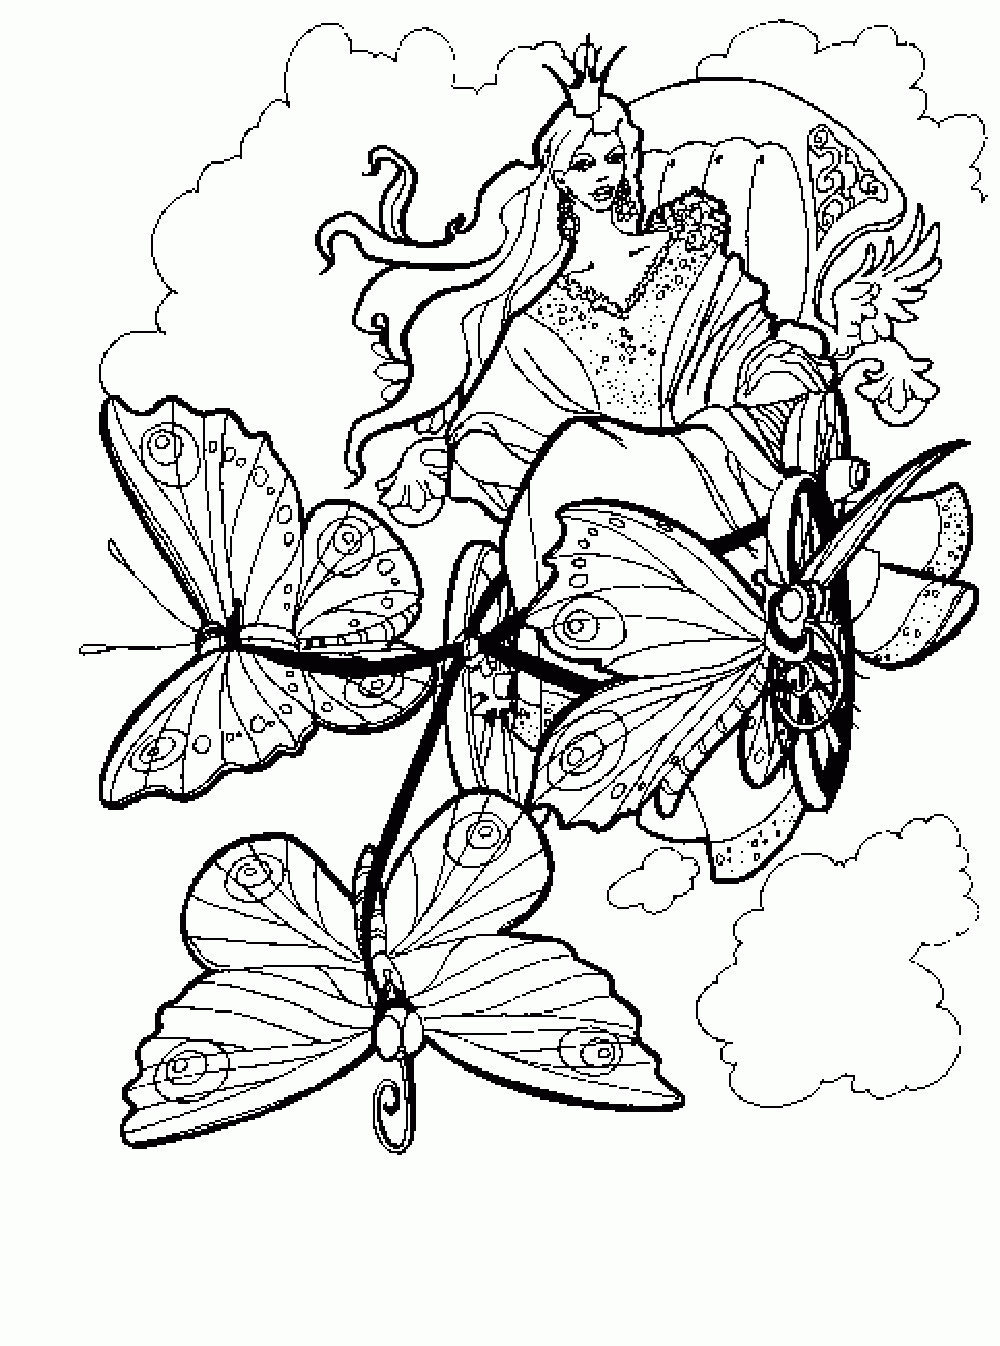 Advanced For Adults - Coloring Pages for Kids and for Adults